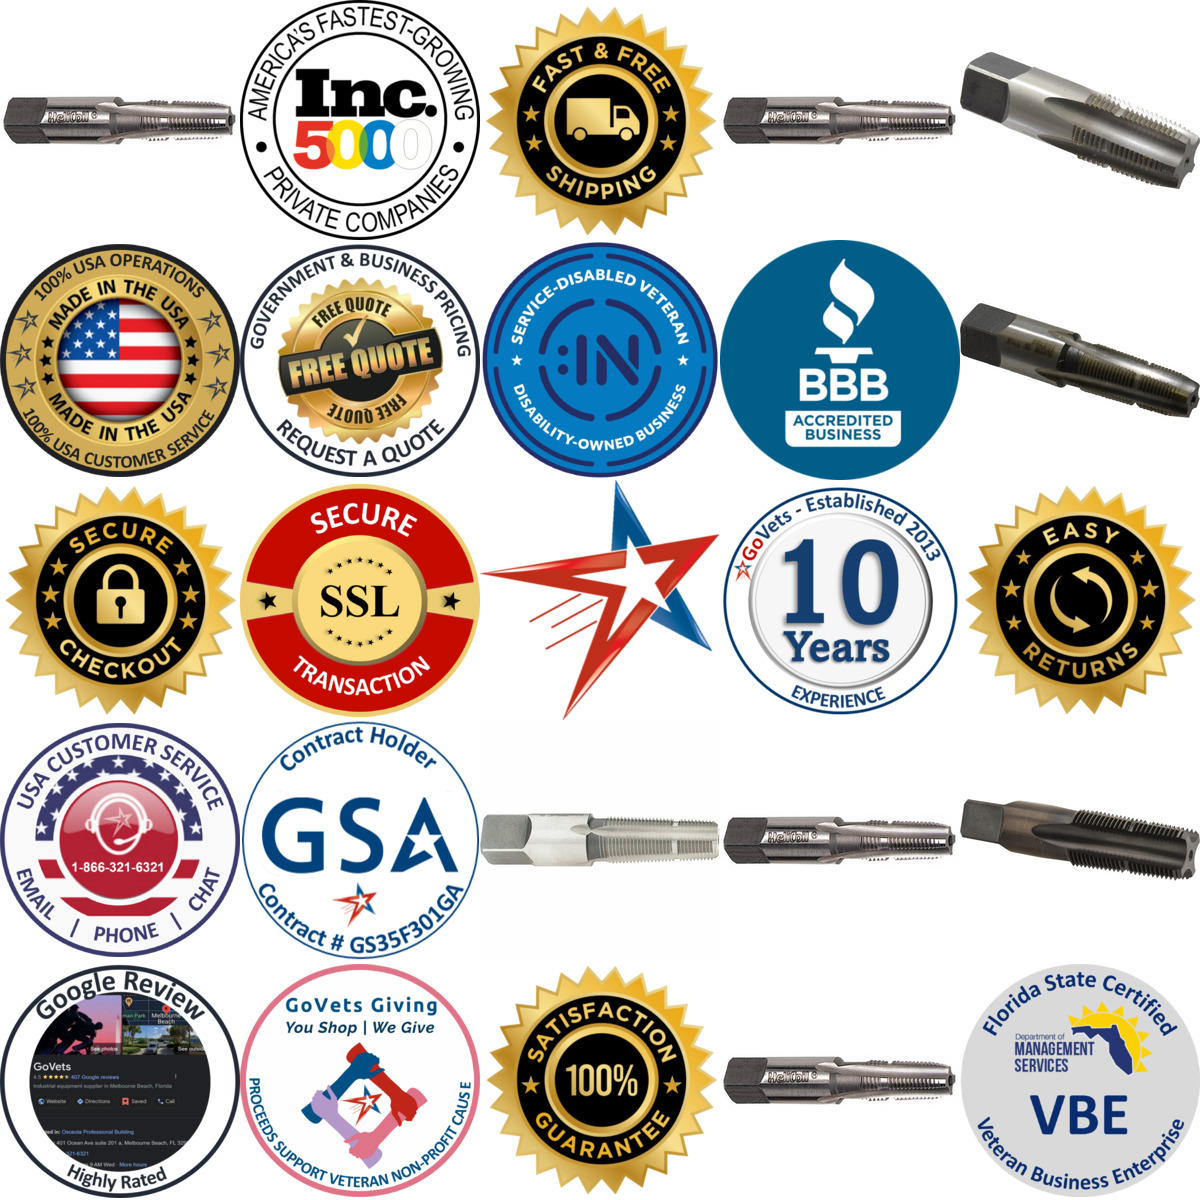 A selection of Pipe Sti Taps products on GoVets